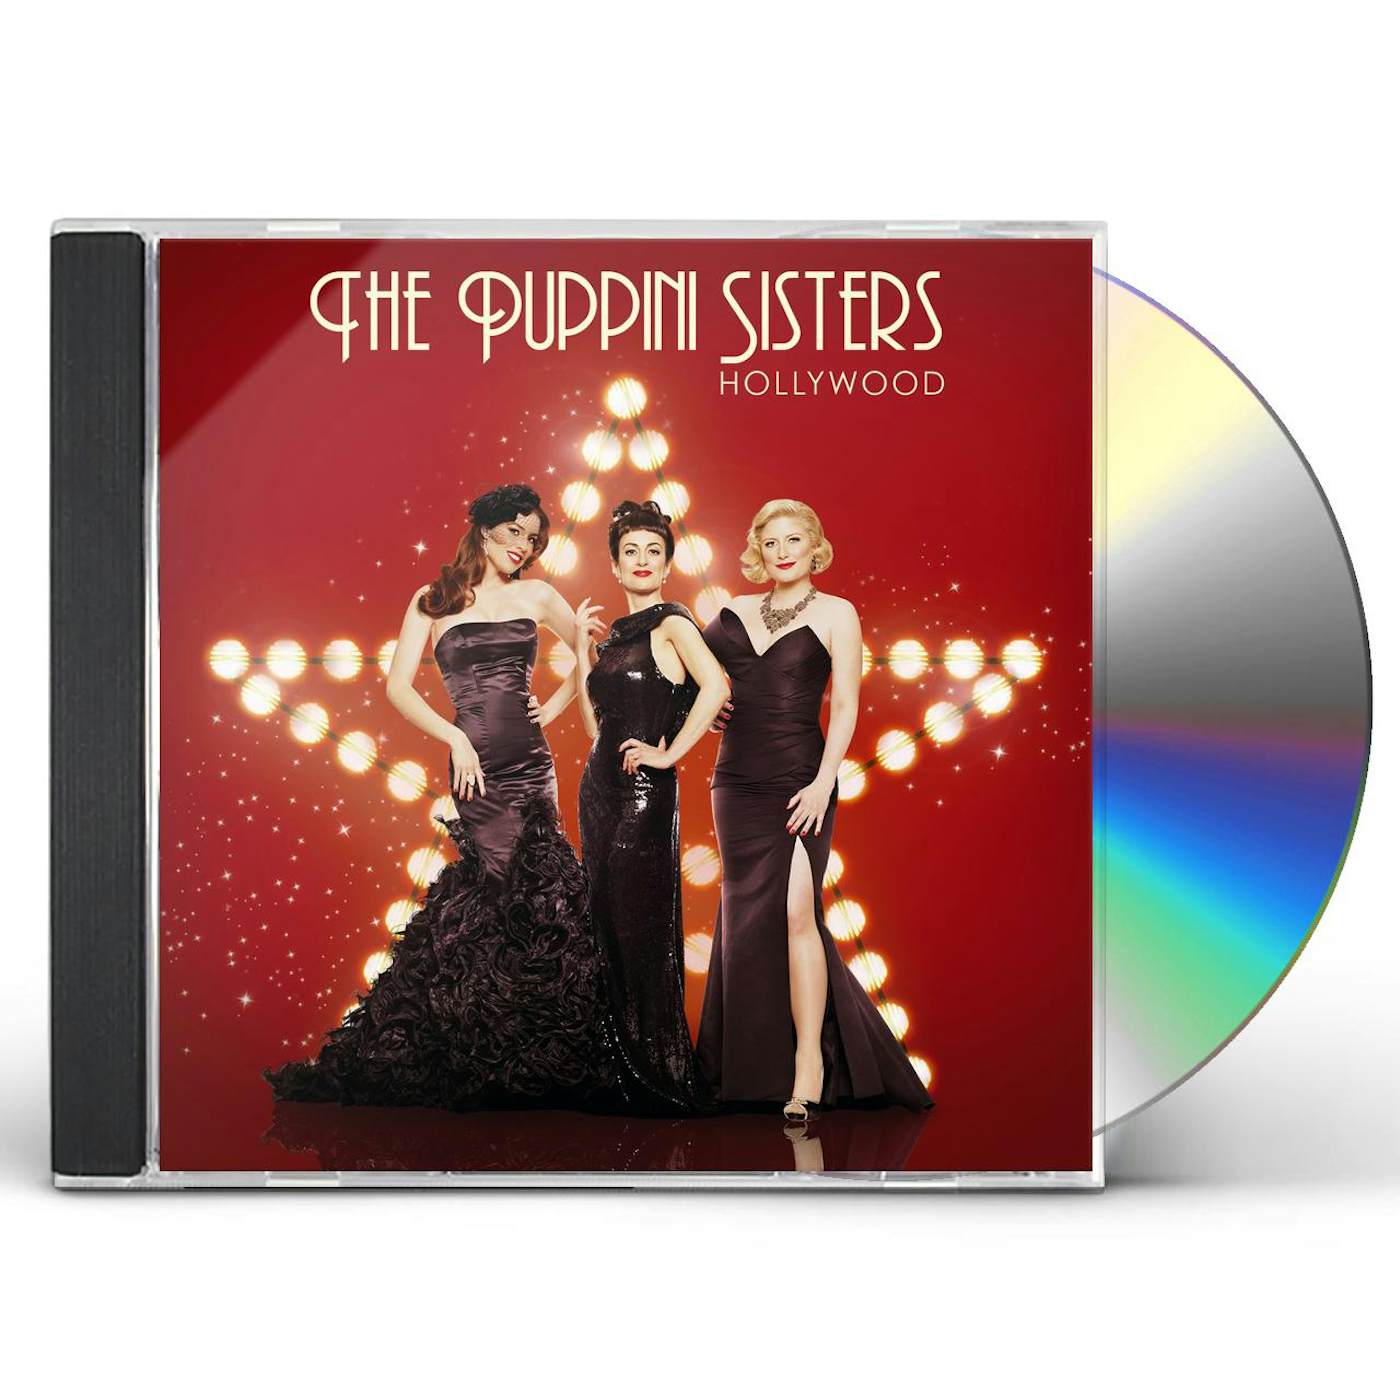 The Puppini Sisters HOLLYWOOD CD